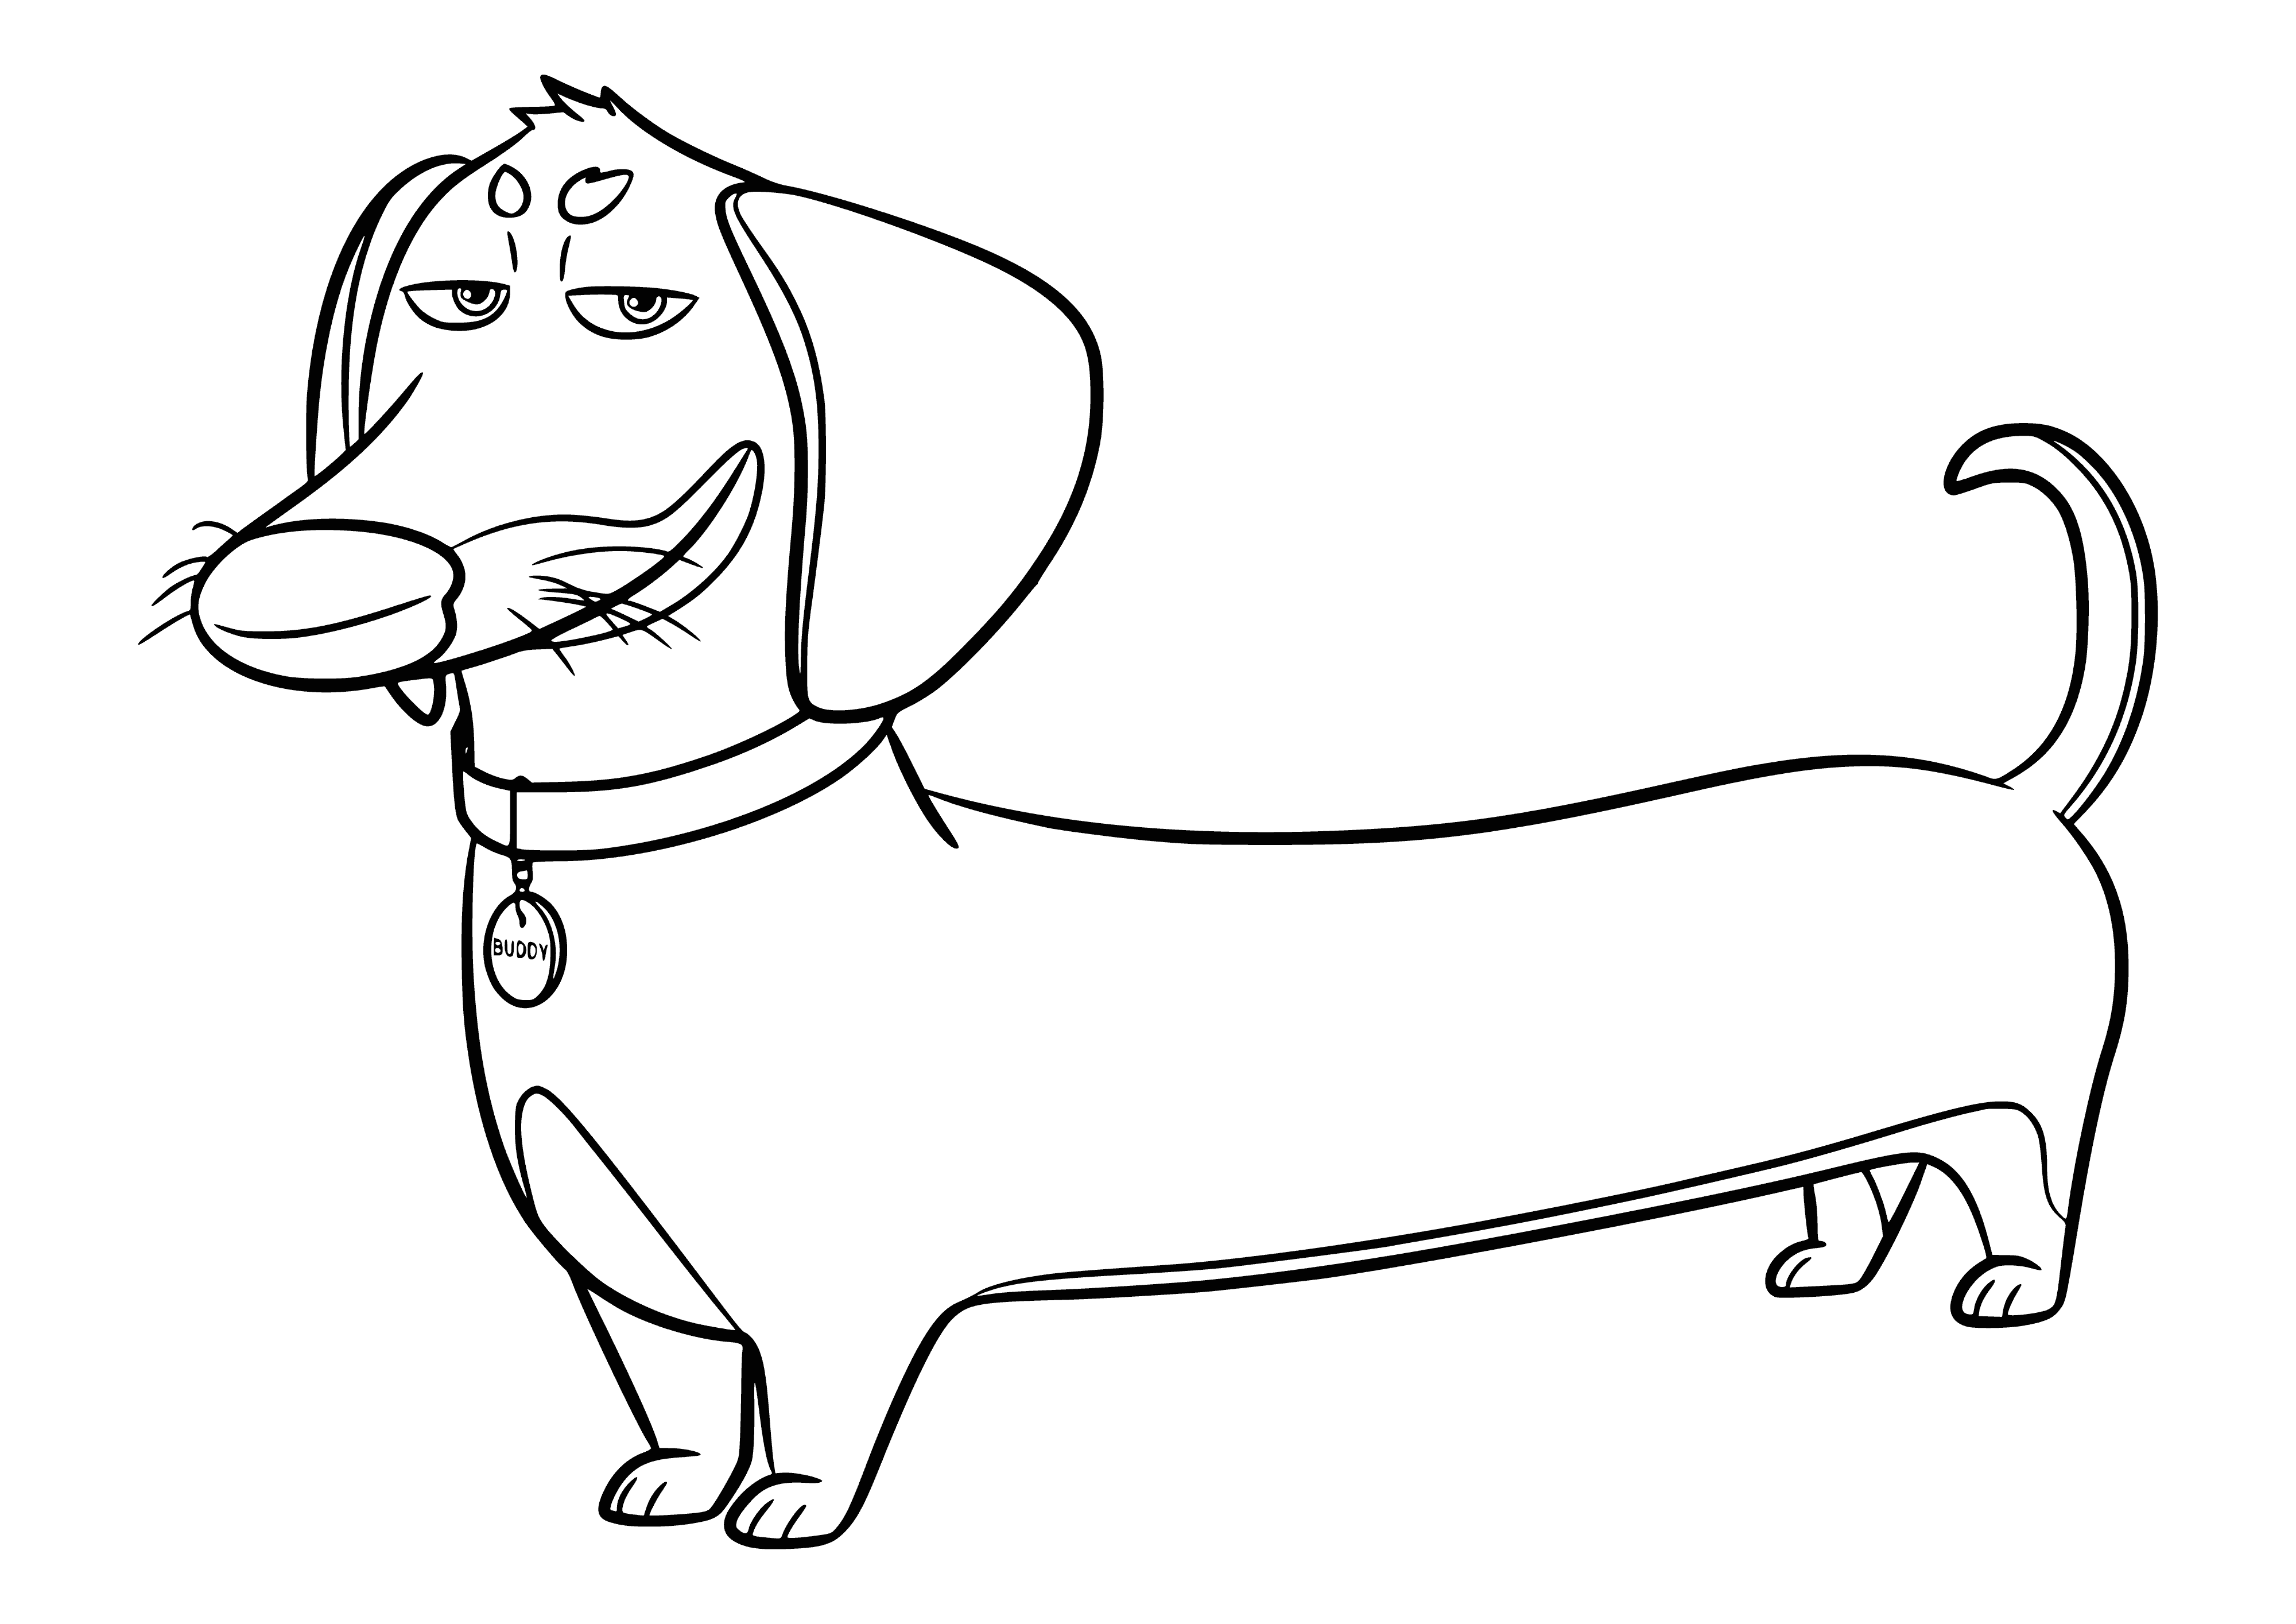 coloring page: Dog with beige & black spots stands on hind legs, arms in air. Behind him is yellow background w/ green leaves. Text says "The Secret Life of Pets - Buddy fee".